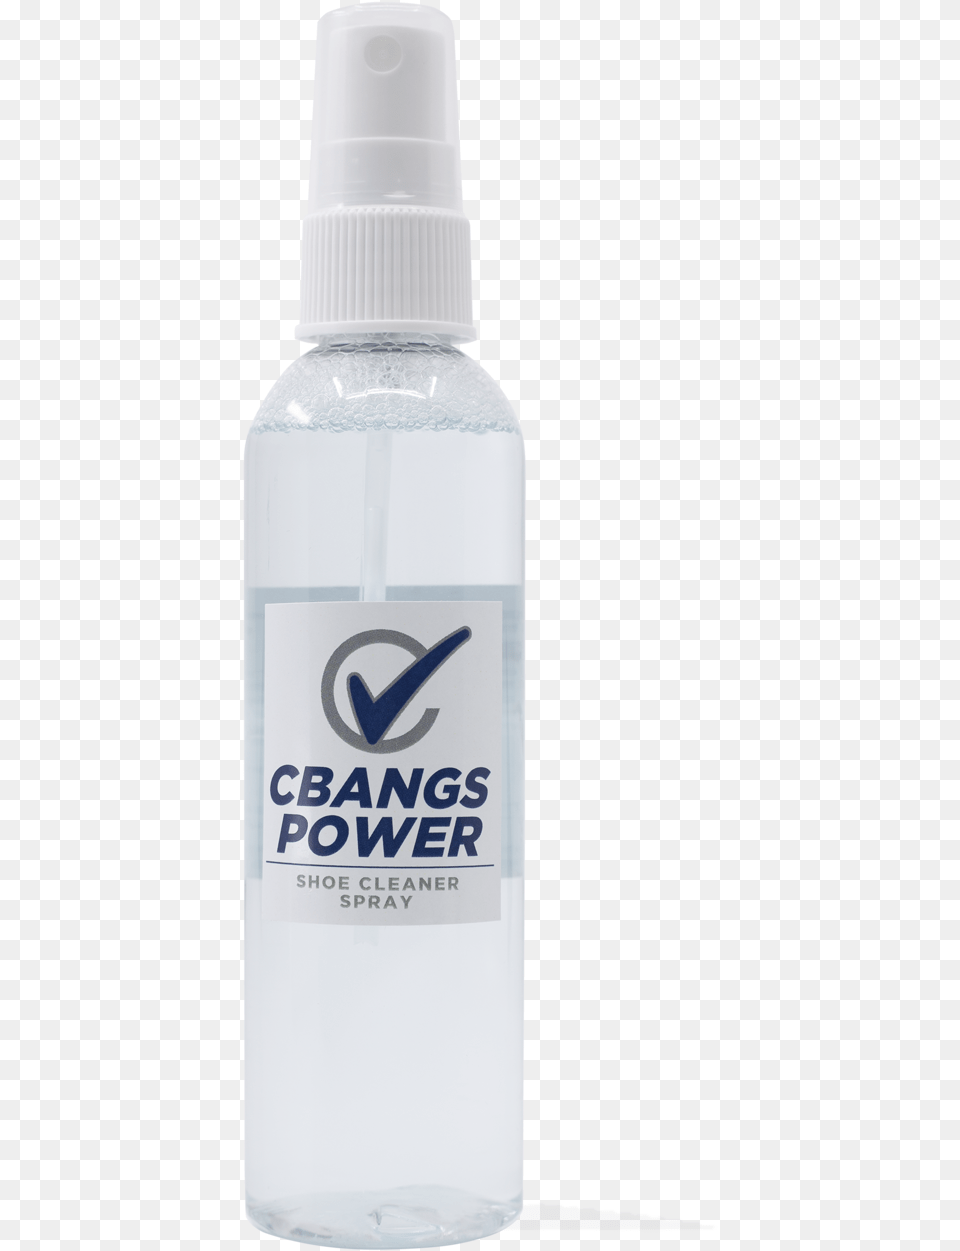 Cbangs Power Shoe Cleaner Spray Pure Romance Stretch Mark, Bottle, Cosmetics, Shaker Png Image